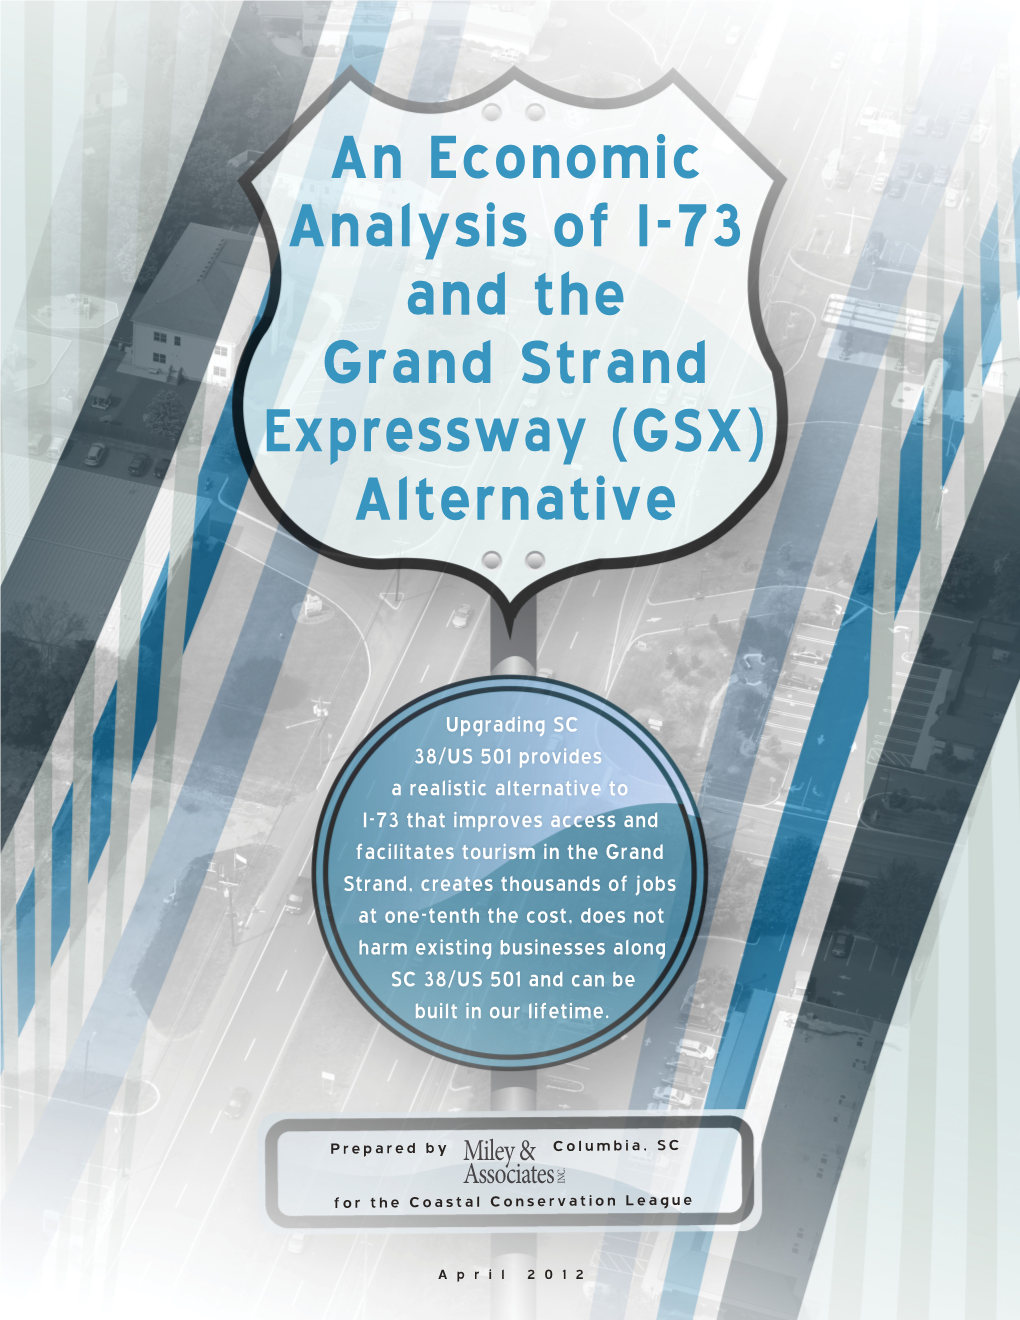 An Economic Analysis of I-73 and the Grand Strand Expressway (GSX) Alternative